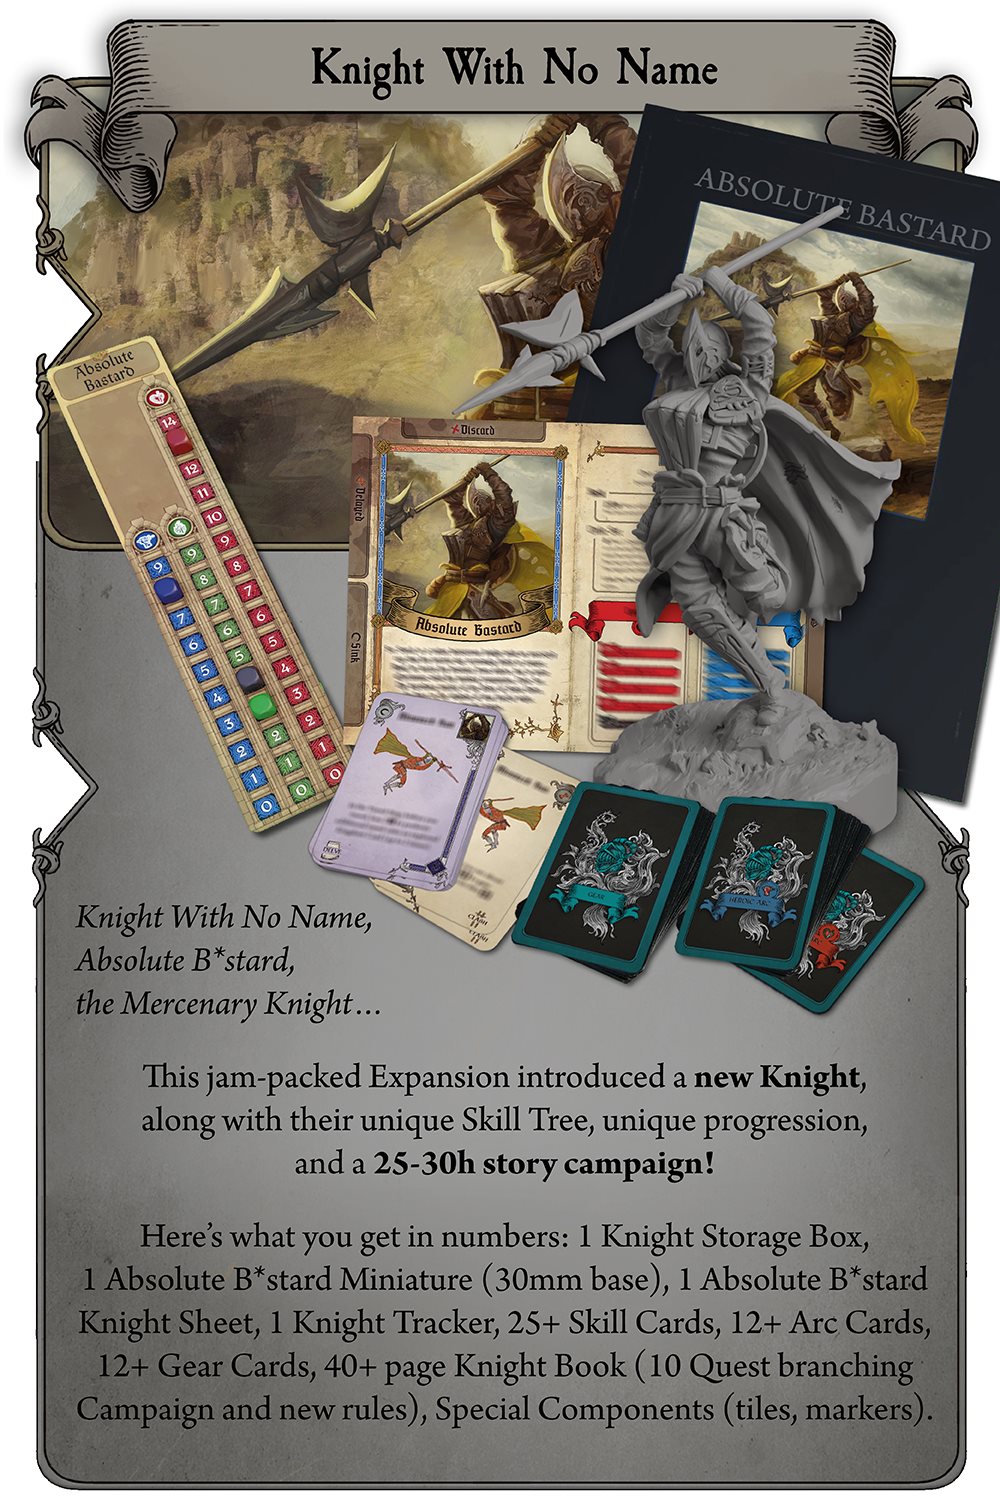 Kingdoms Forlorn: Dragons, Devils and Kings Tale of the knight with no name Knight Expansion + Stretchgoals + KS Exclusive English